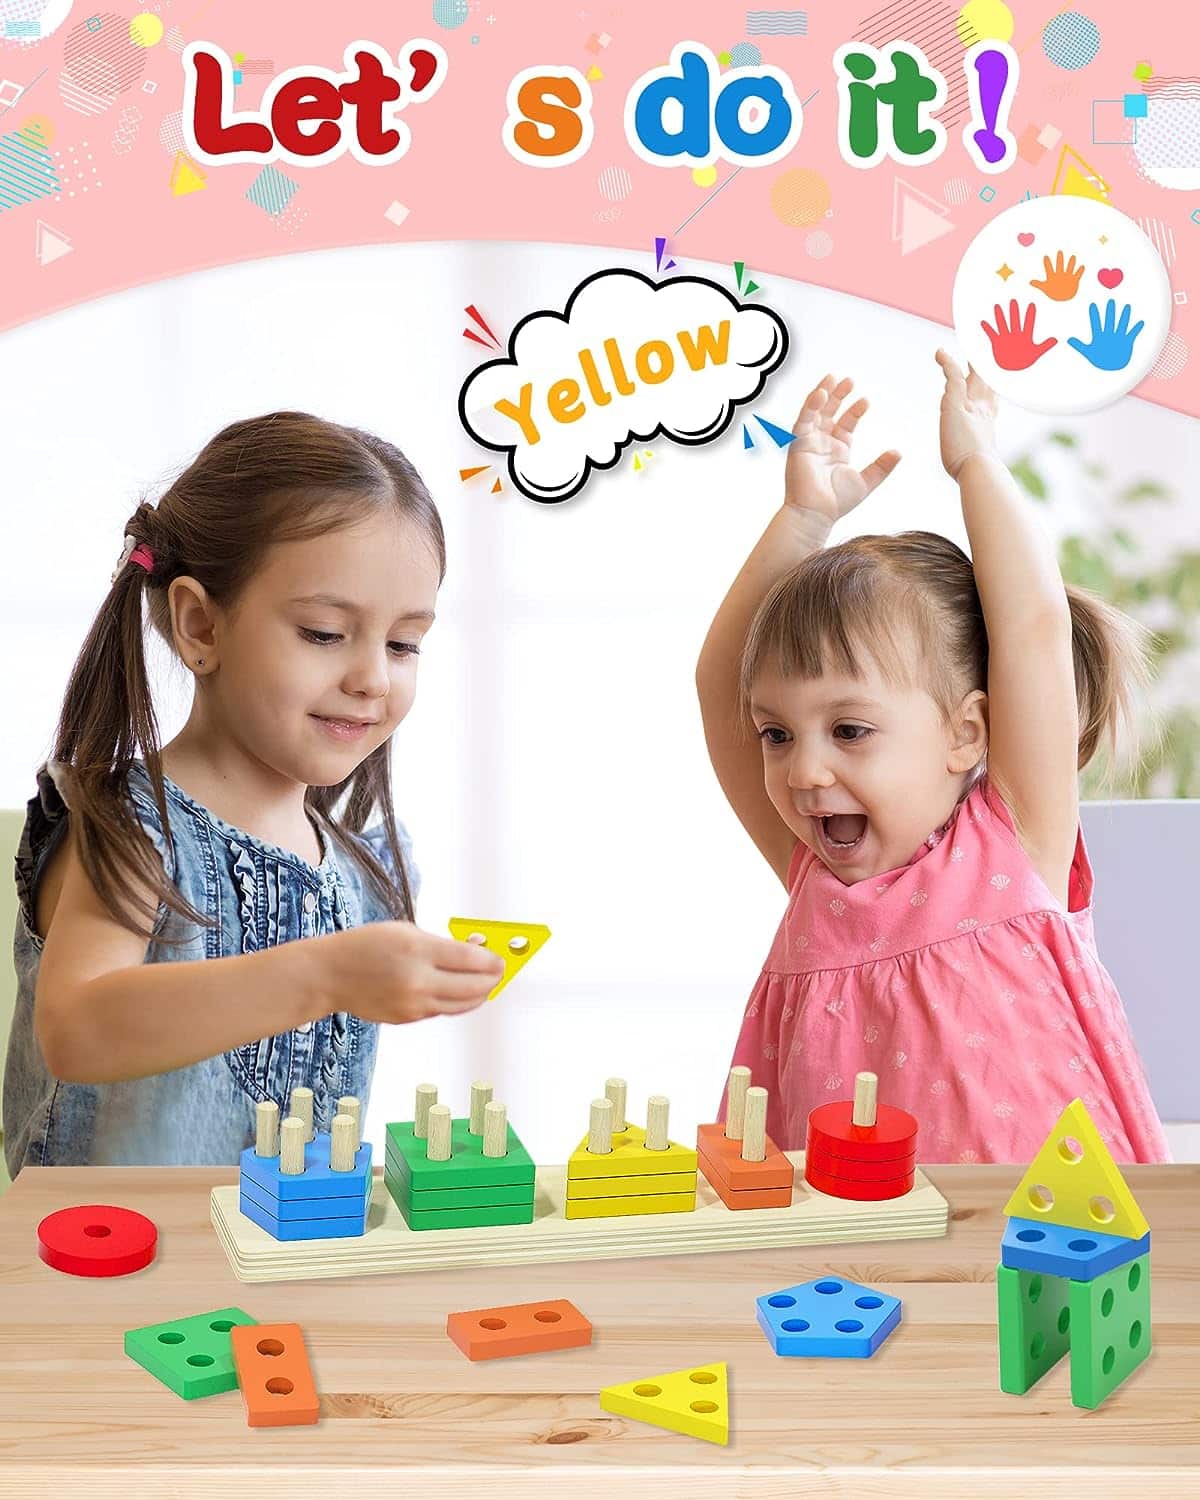 Yetonamr Montessori Toys Review: A Perfect Educational Toy for Toddlers